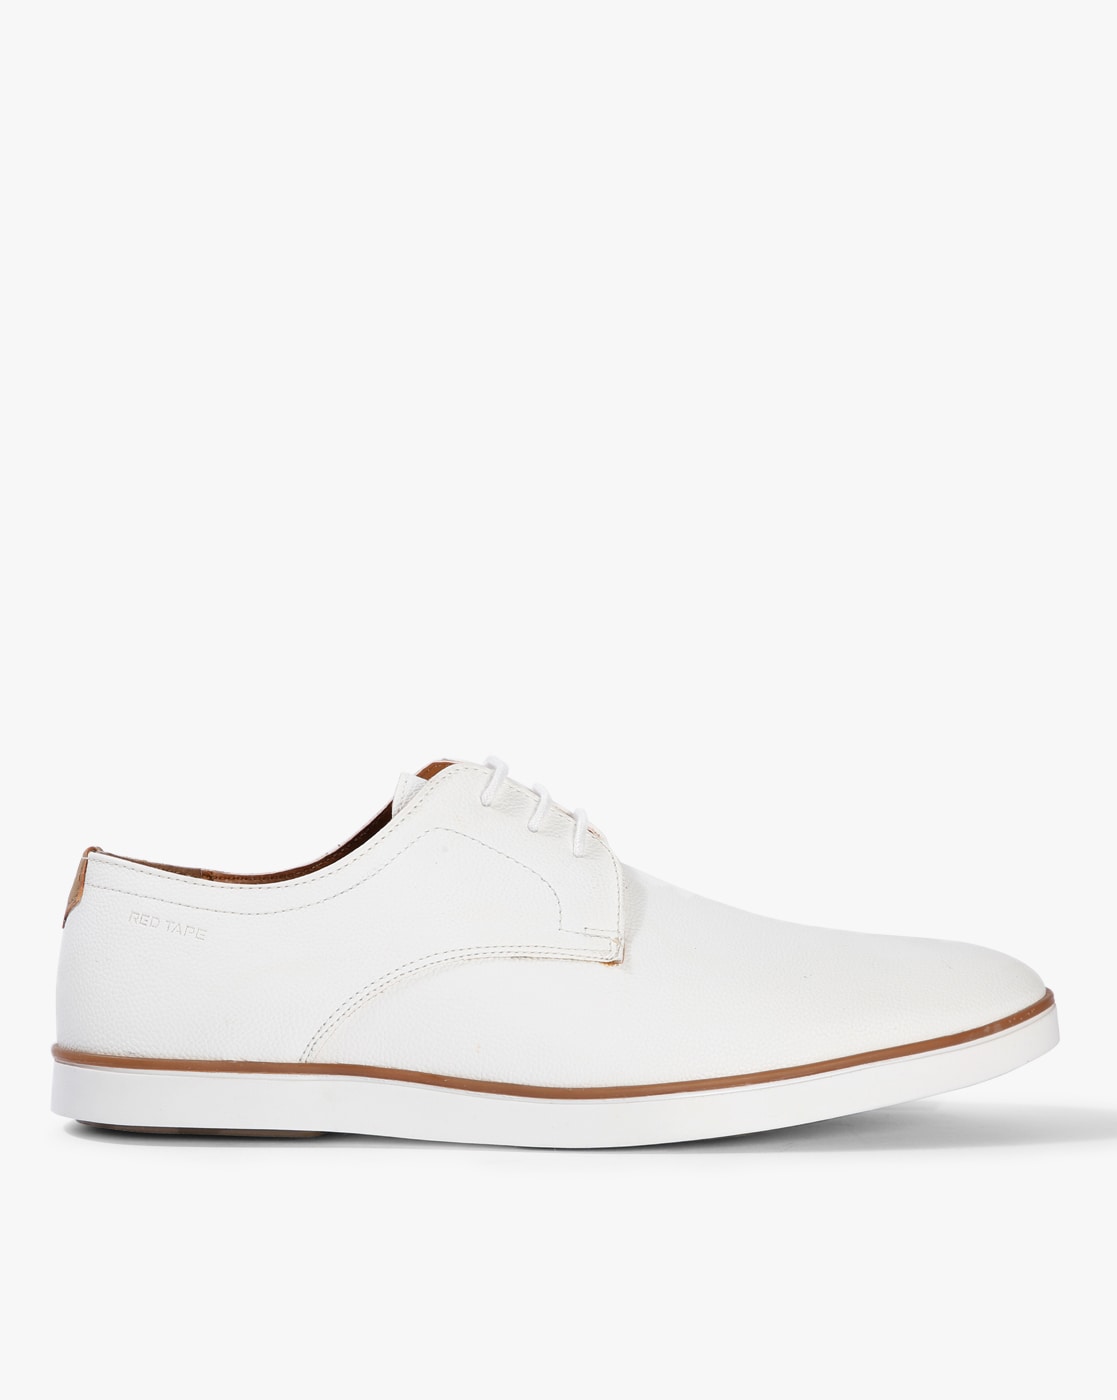 red tape men's leather casual shoes